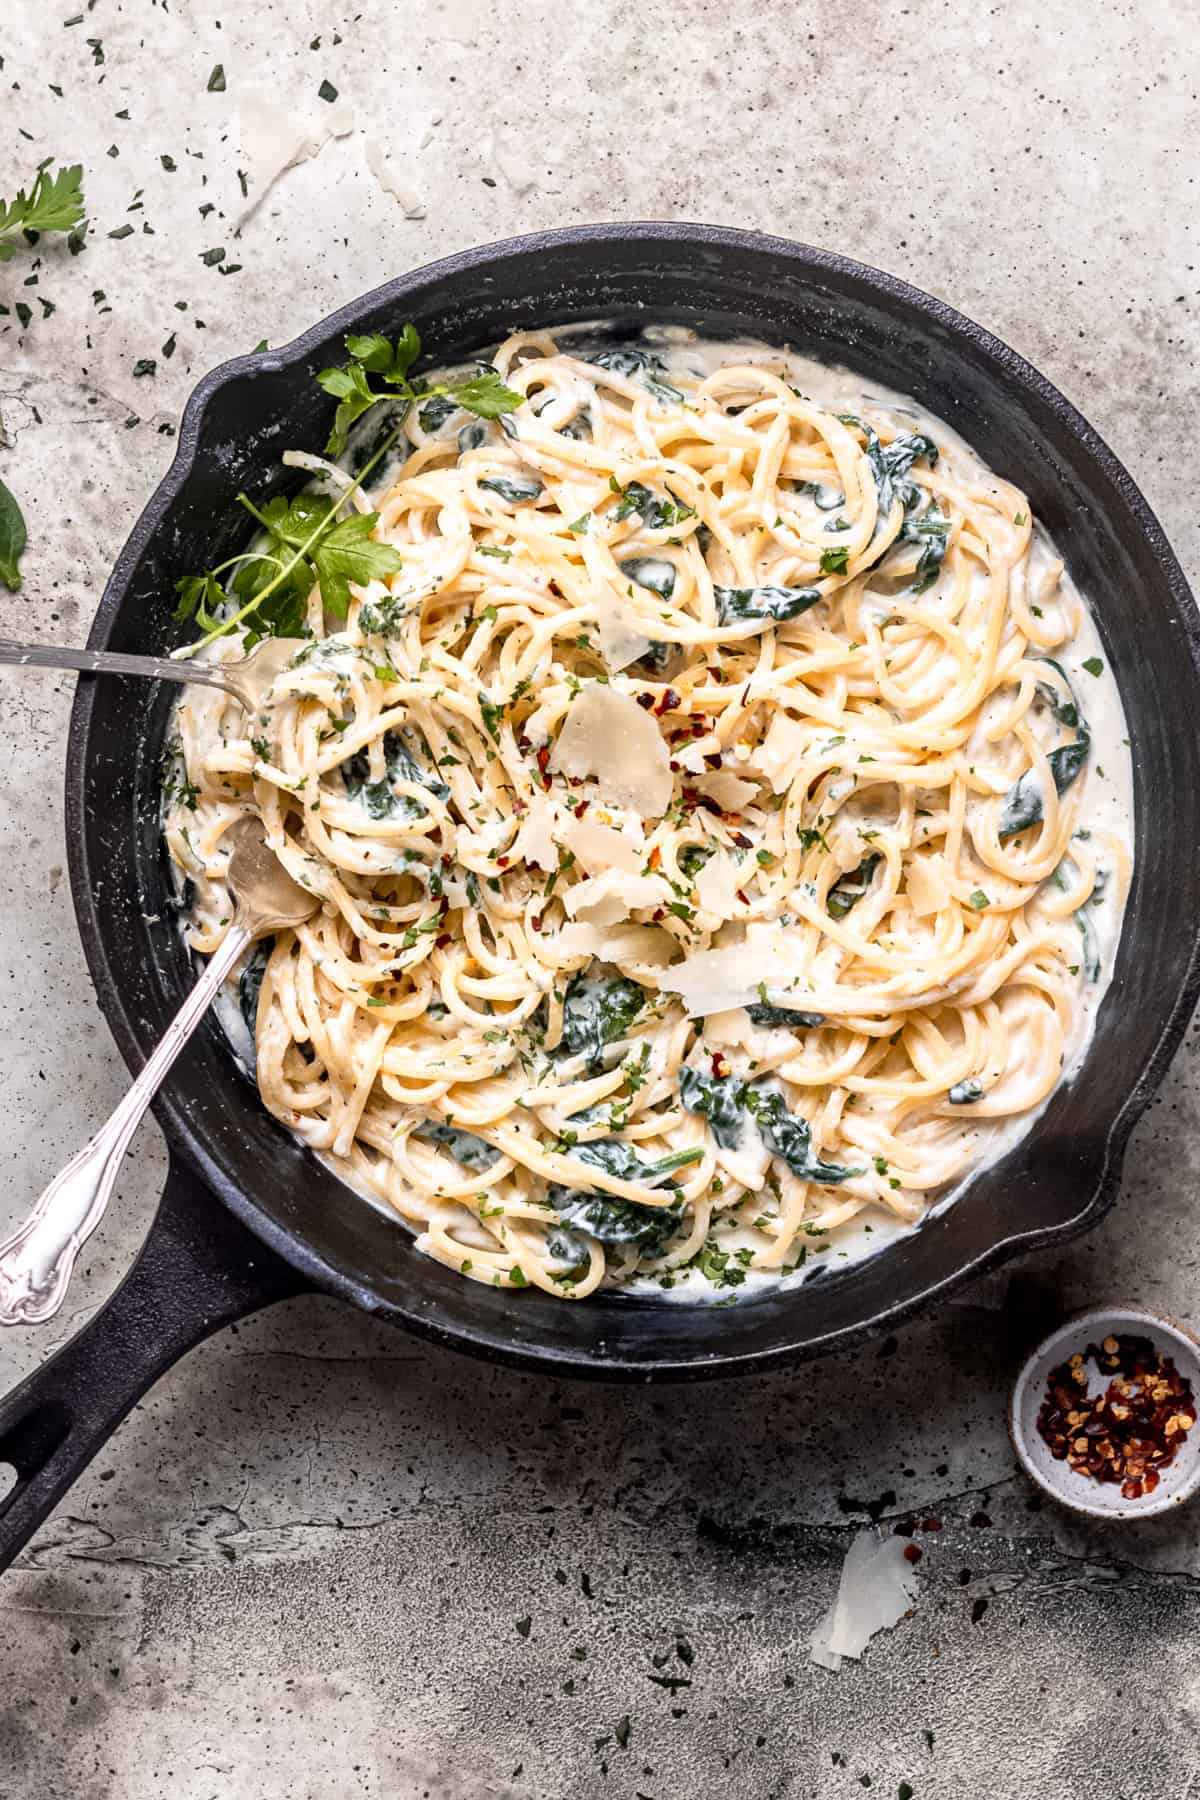 Pasta with parmesan cheese and ricotta sauce.